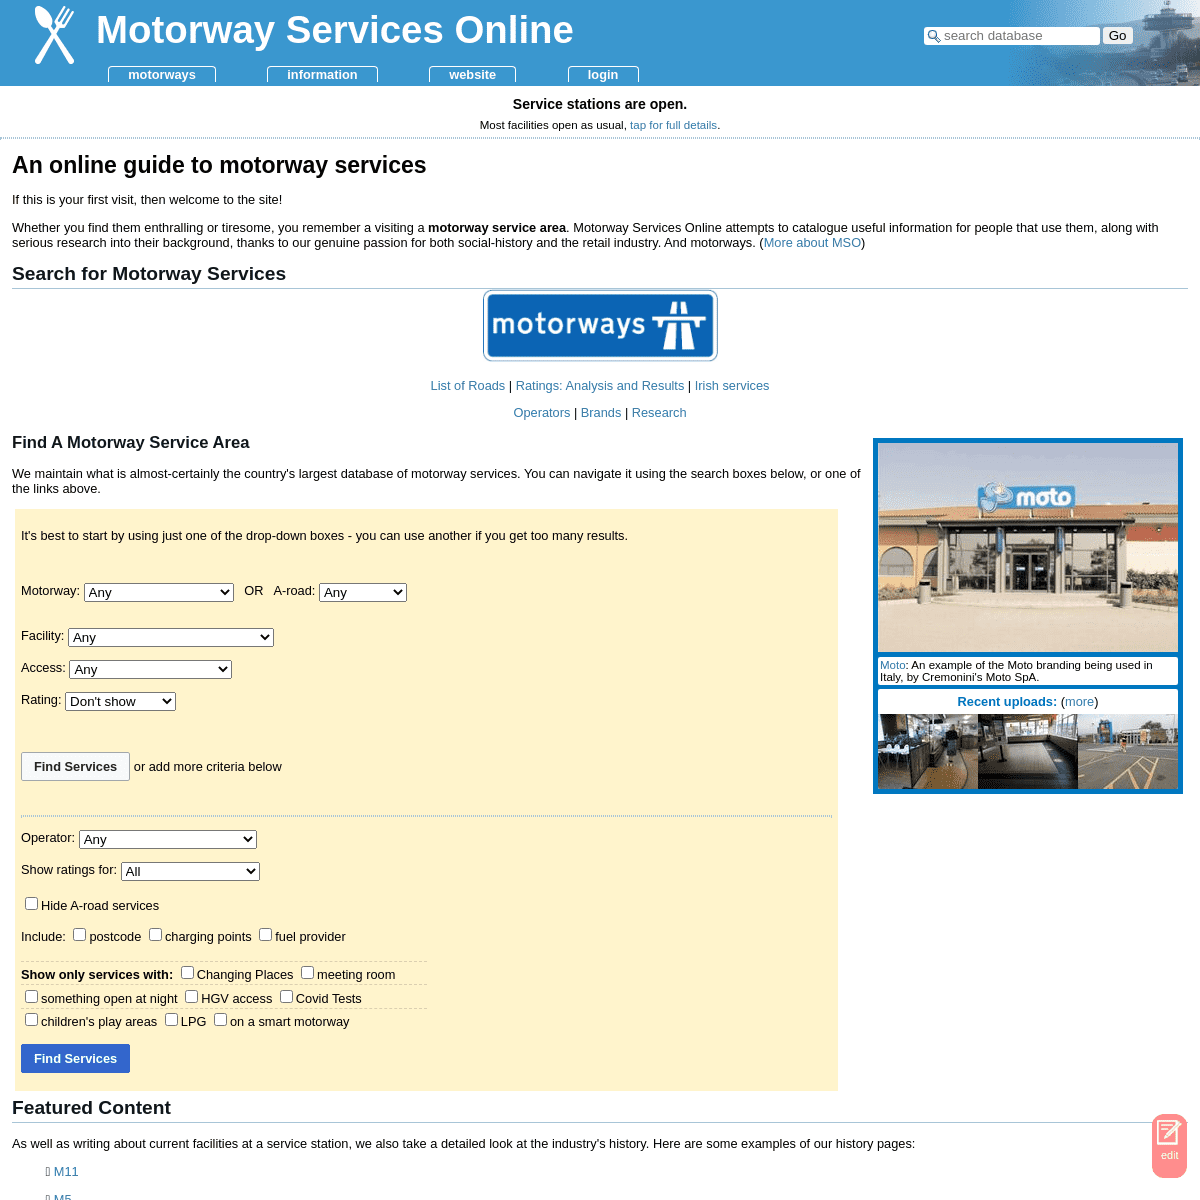 A complete backup of https://motorwayservicesonline.co.uk